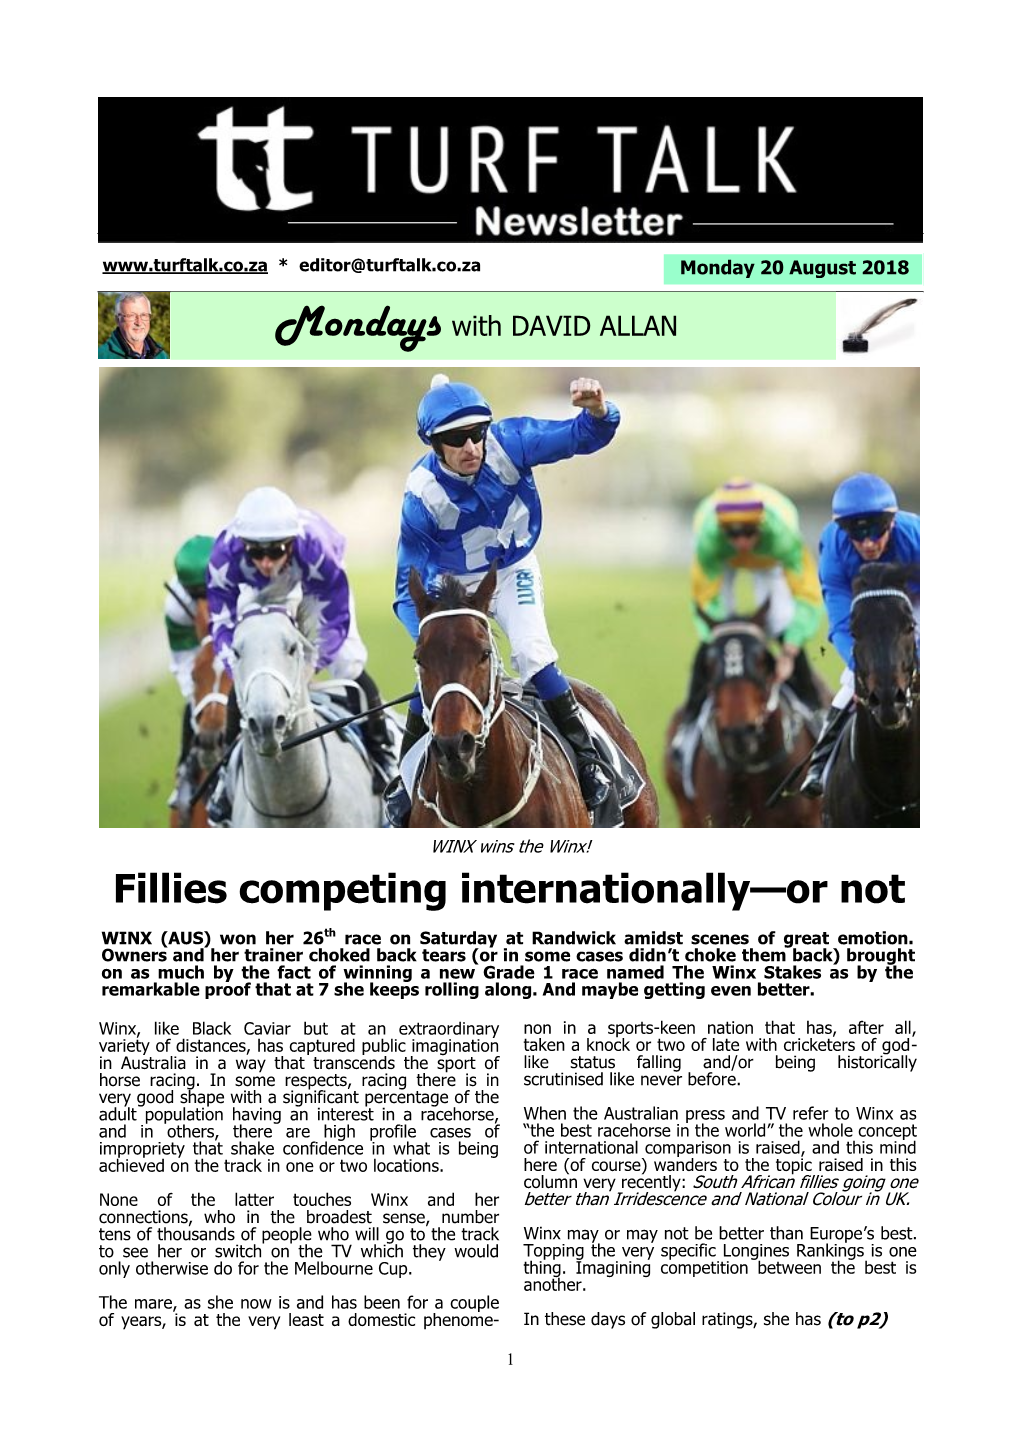 Fillies Competing Internationally—Or Not